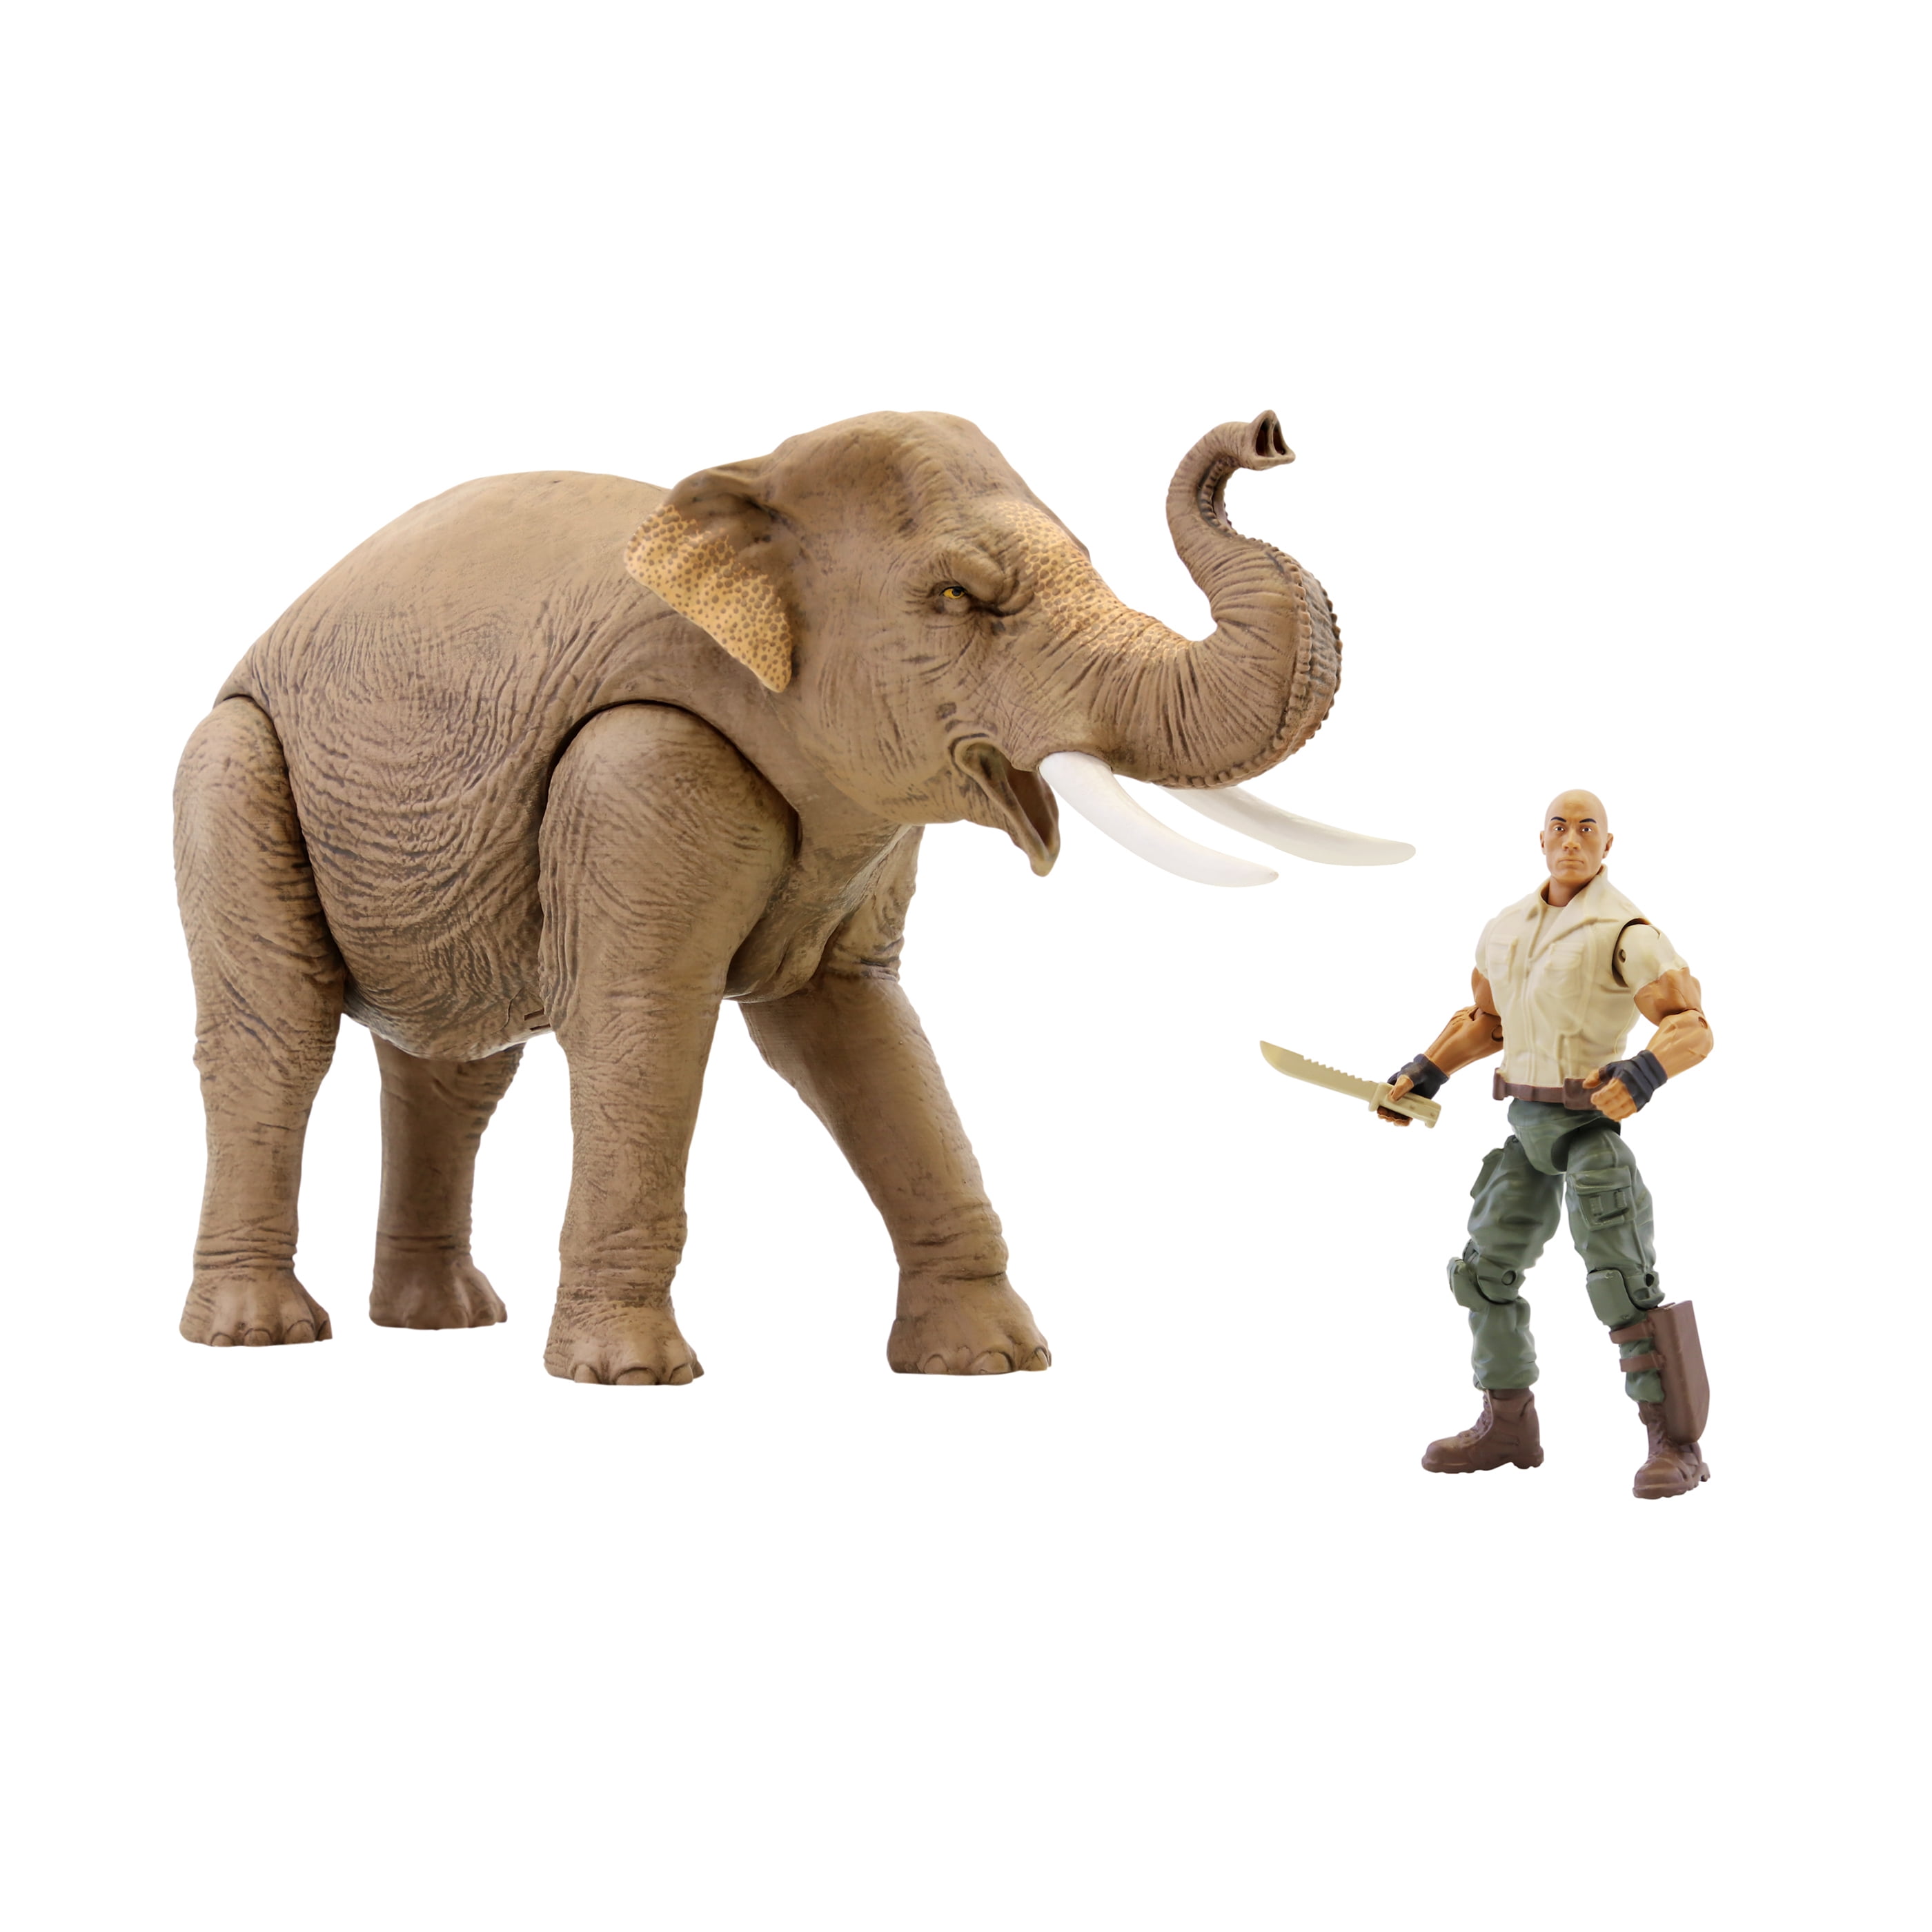 Elephant Adventure Set Animals Action Figure Toys Kids Gifts Collectibles 